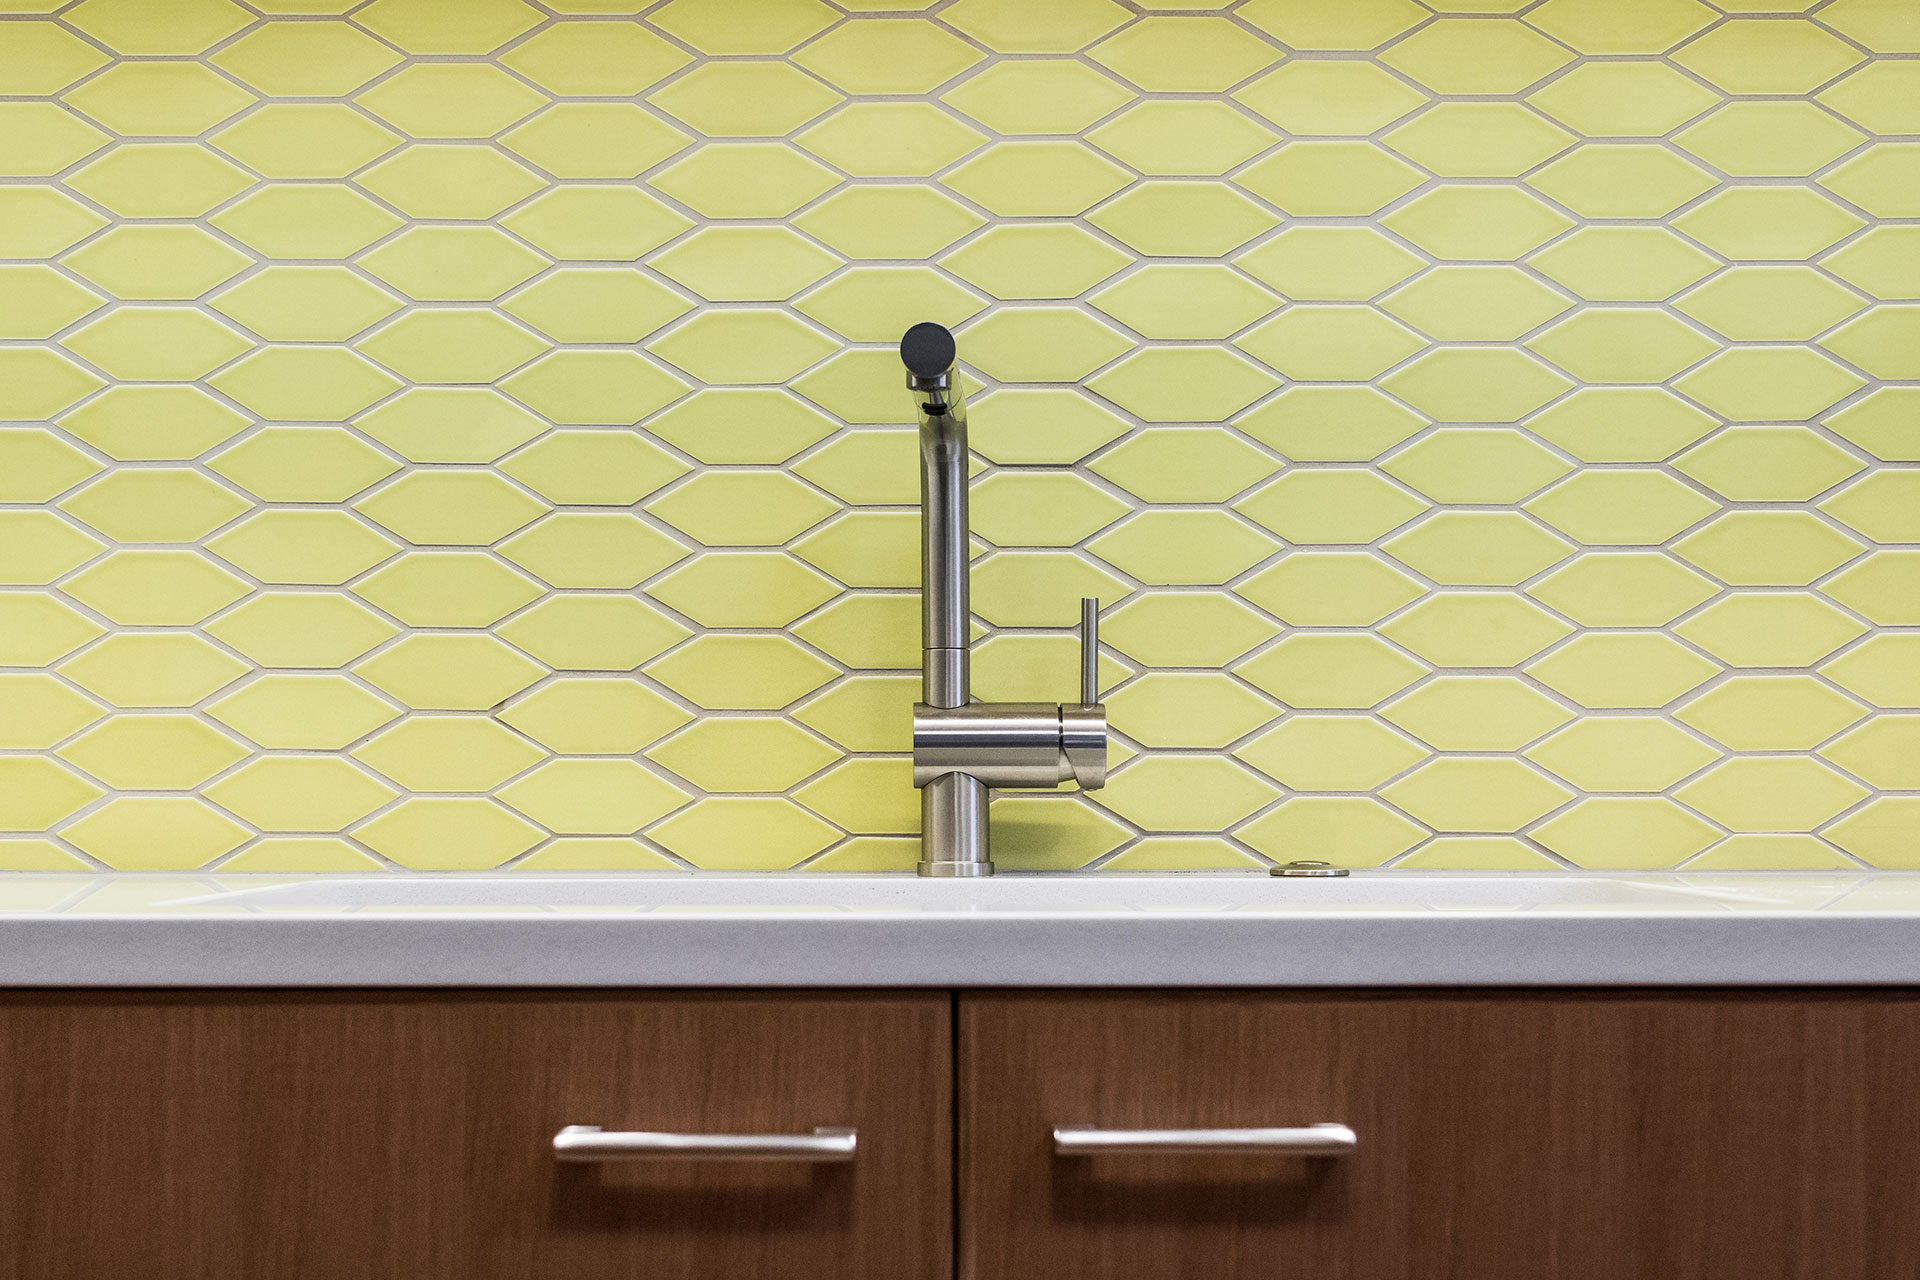 The kitchen tile backsplash features yellow, oblong hexagon tiles at the Alameda Modern.